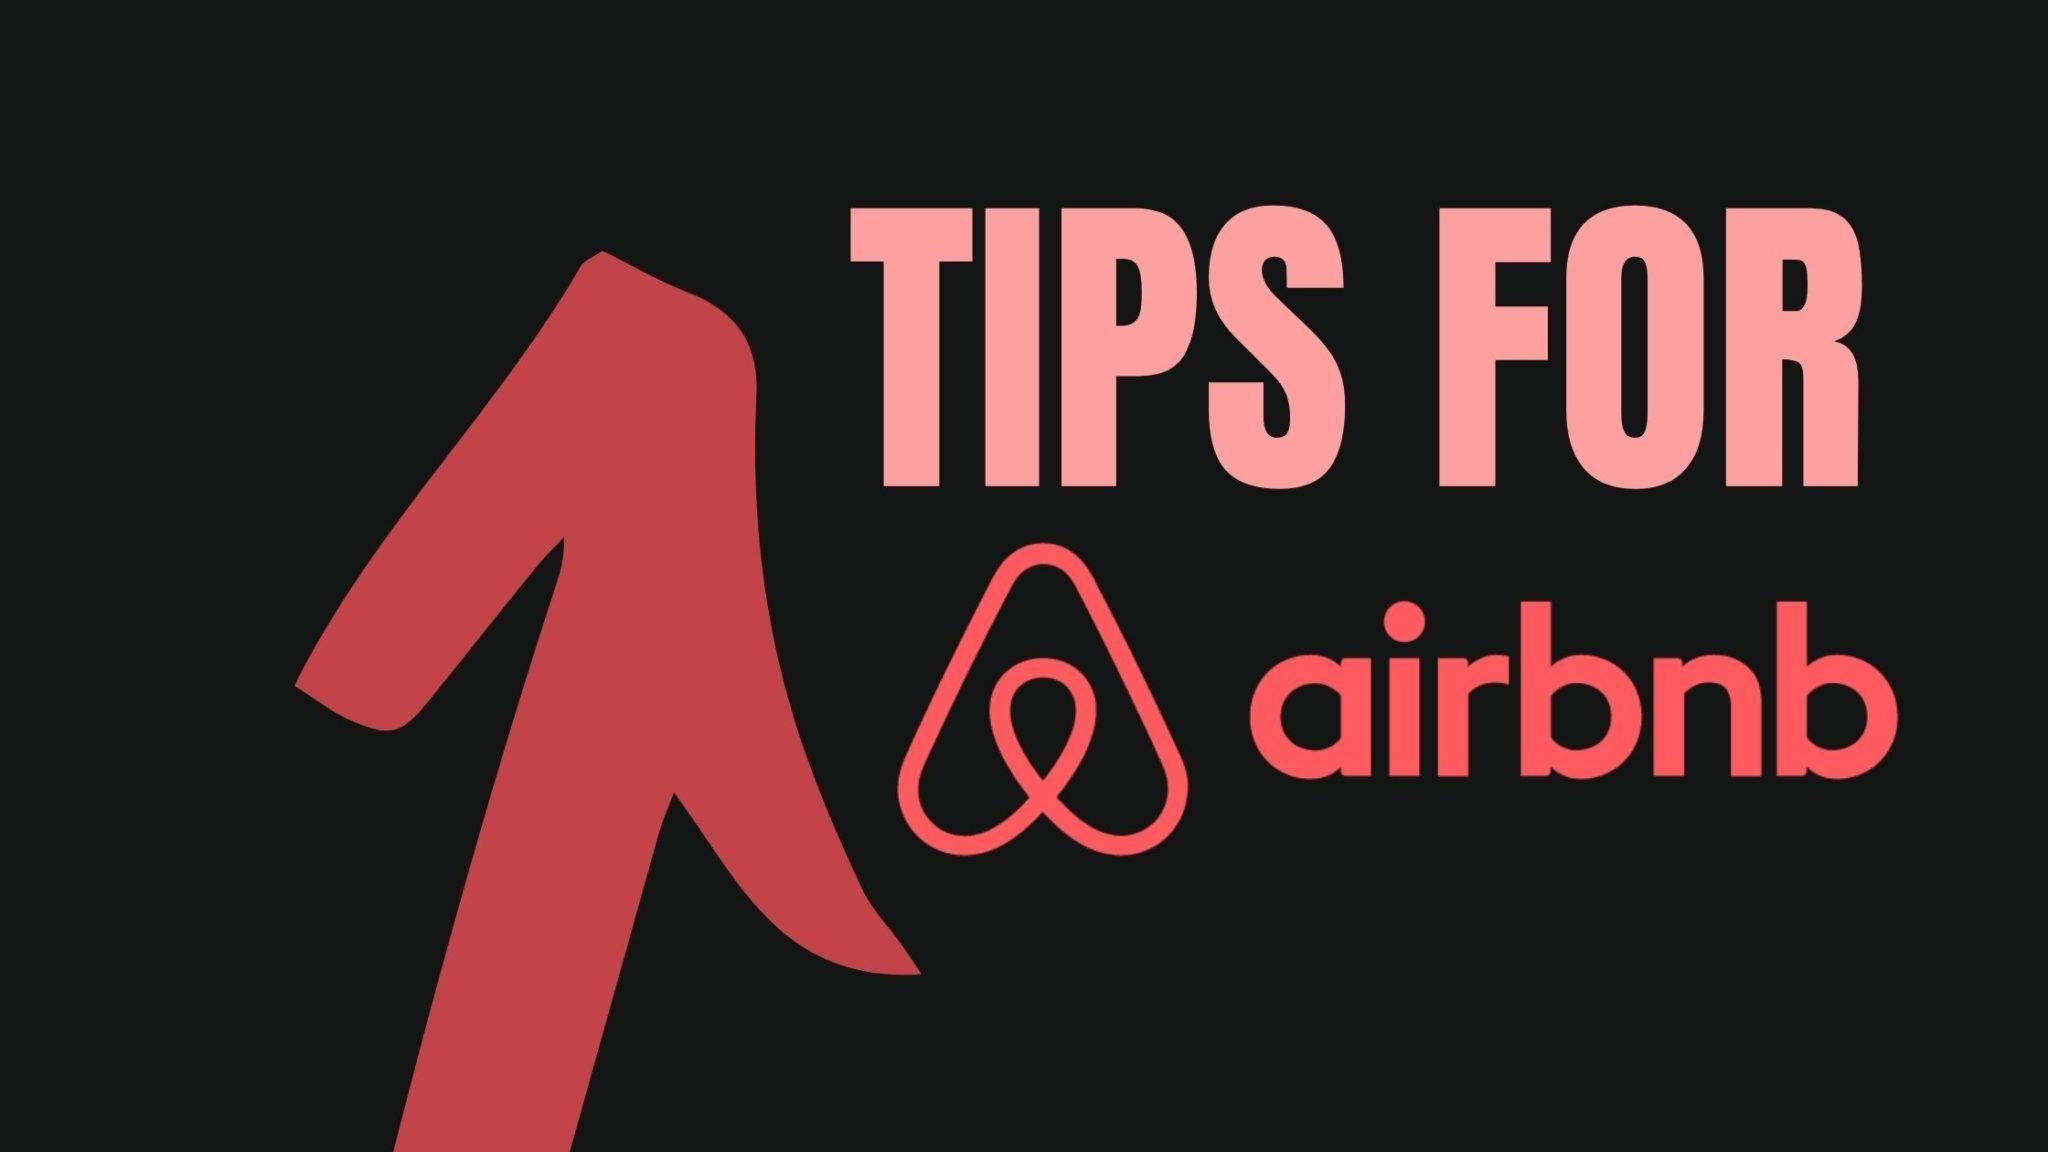 tips for airbnb